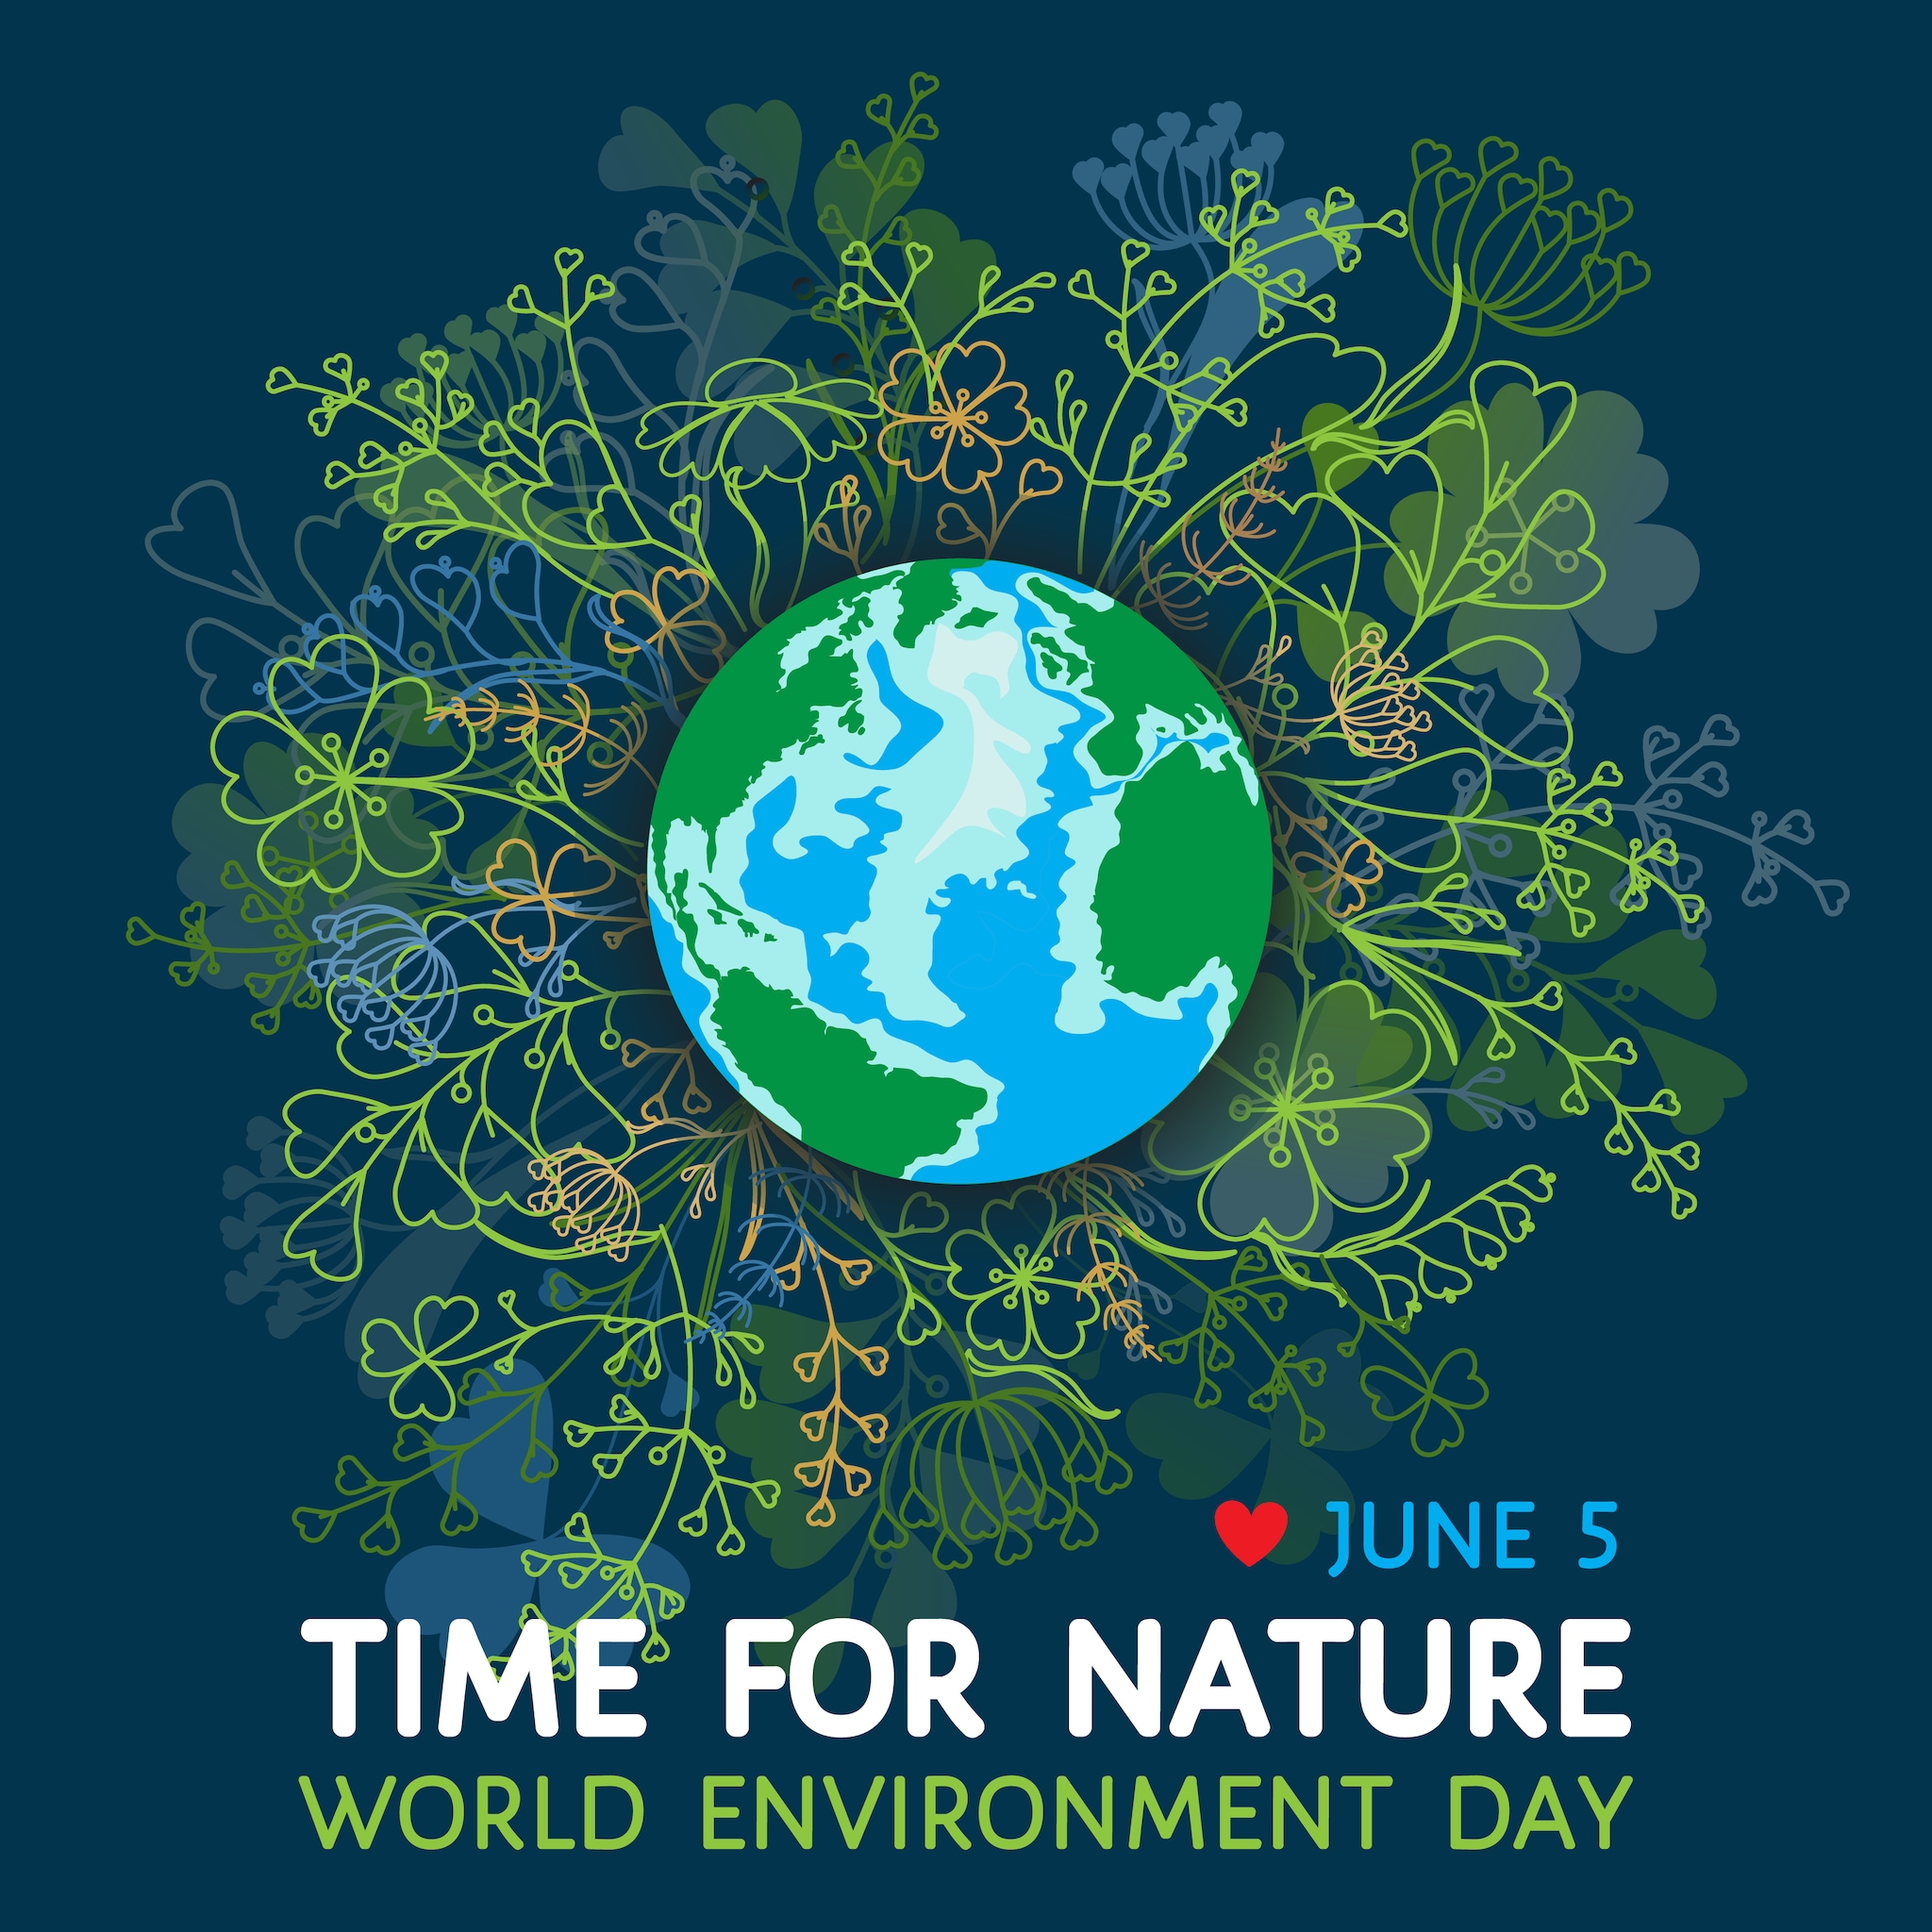 Happy World Environment Day 2022: Images, Wishes, Quotes, Messages and WhatsApp Greetings to Share. (Image: Shutterstock)